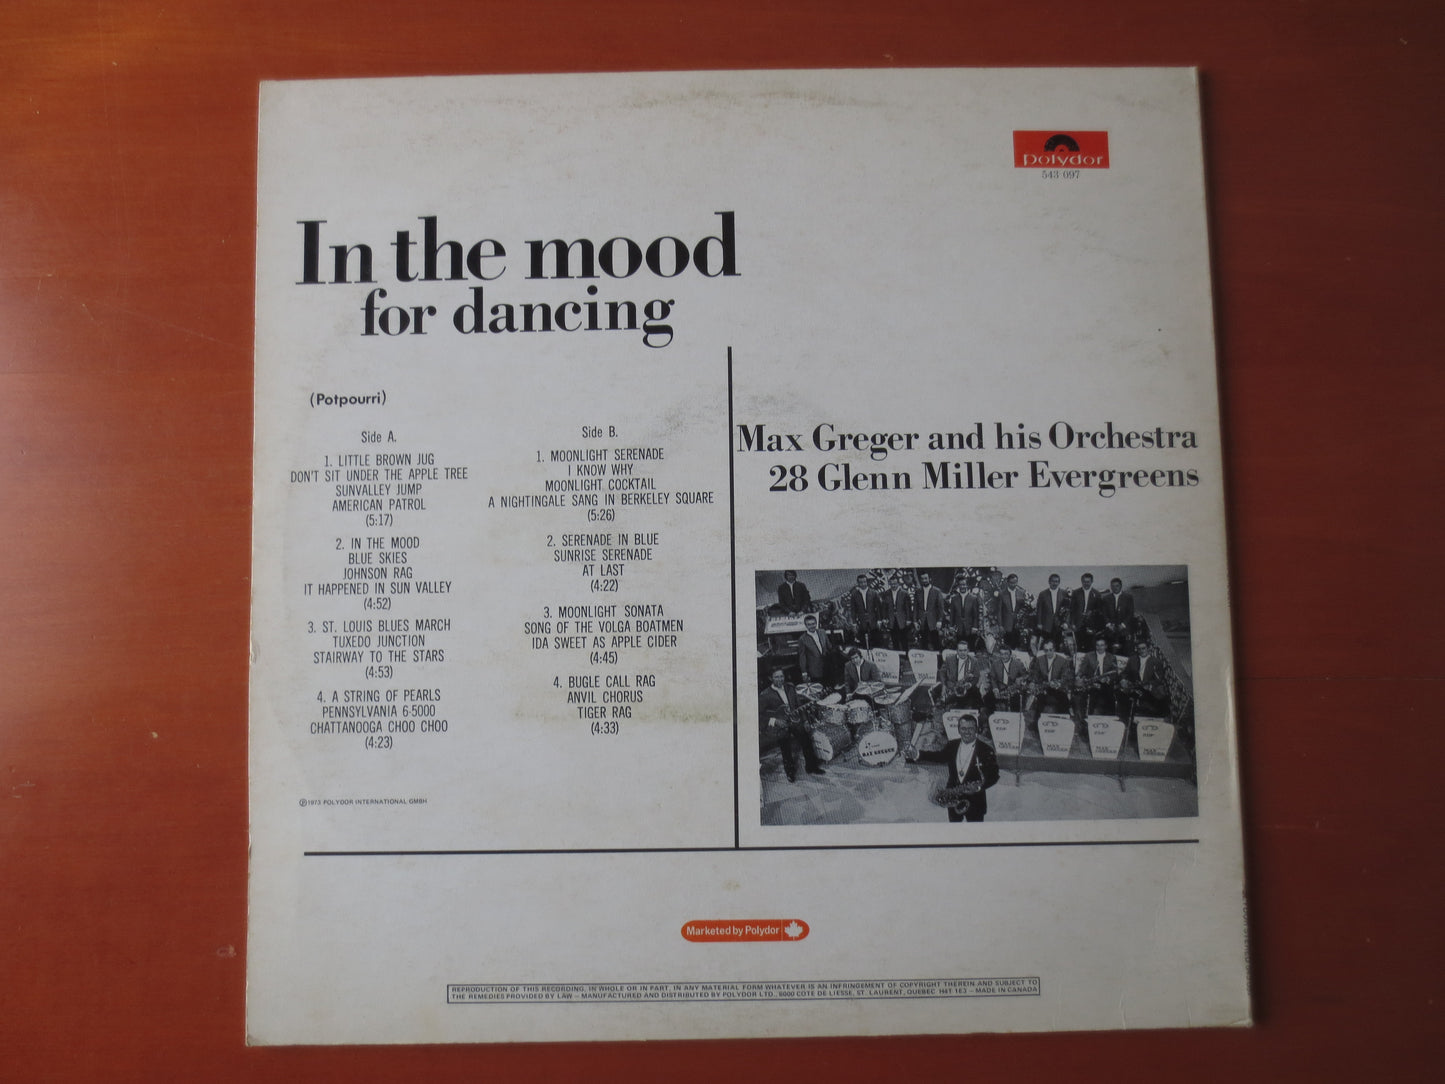 MAX GREGER, In The MOOD, Max Greger Records, Dance Records, Dance Albums, Max Greger Albums, Classical Records, 1969 Record